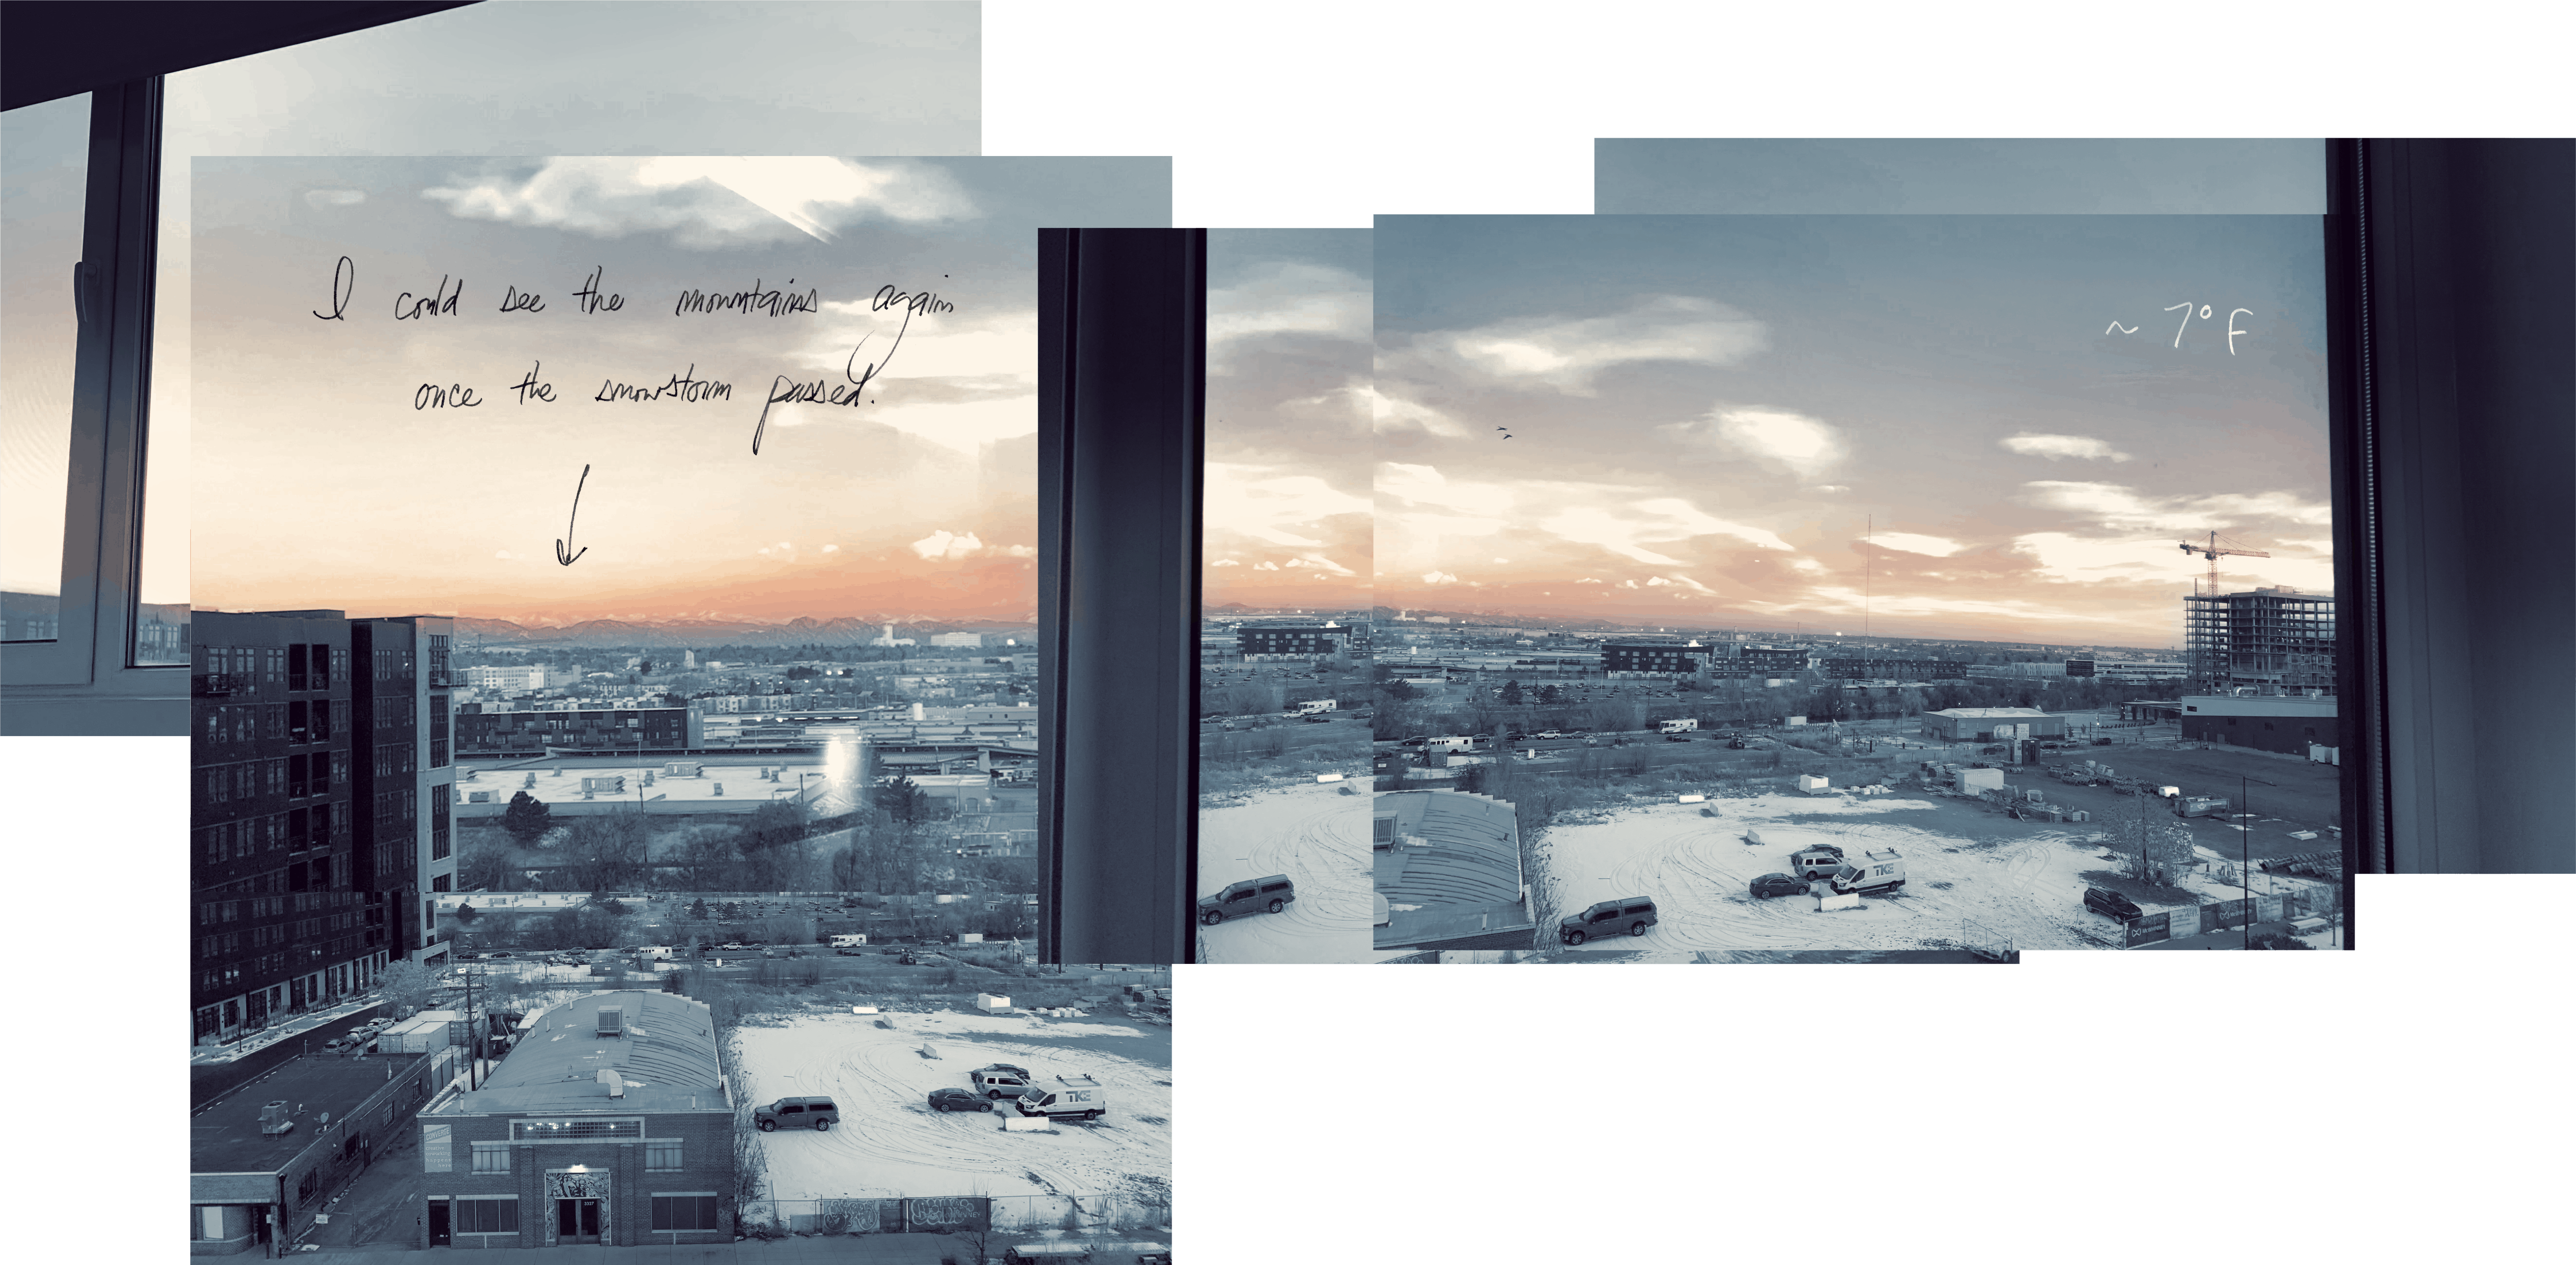 Photo collage: I could see the mountains again once the snowstorm passed.